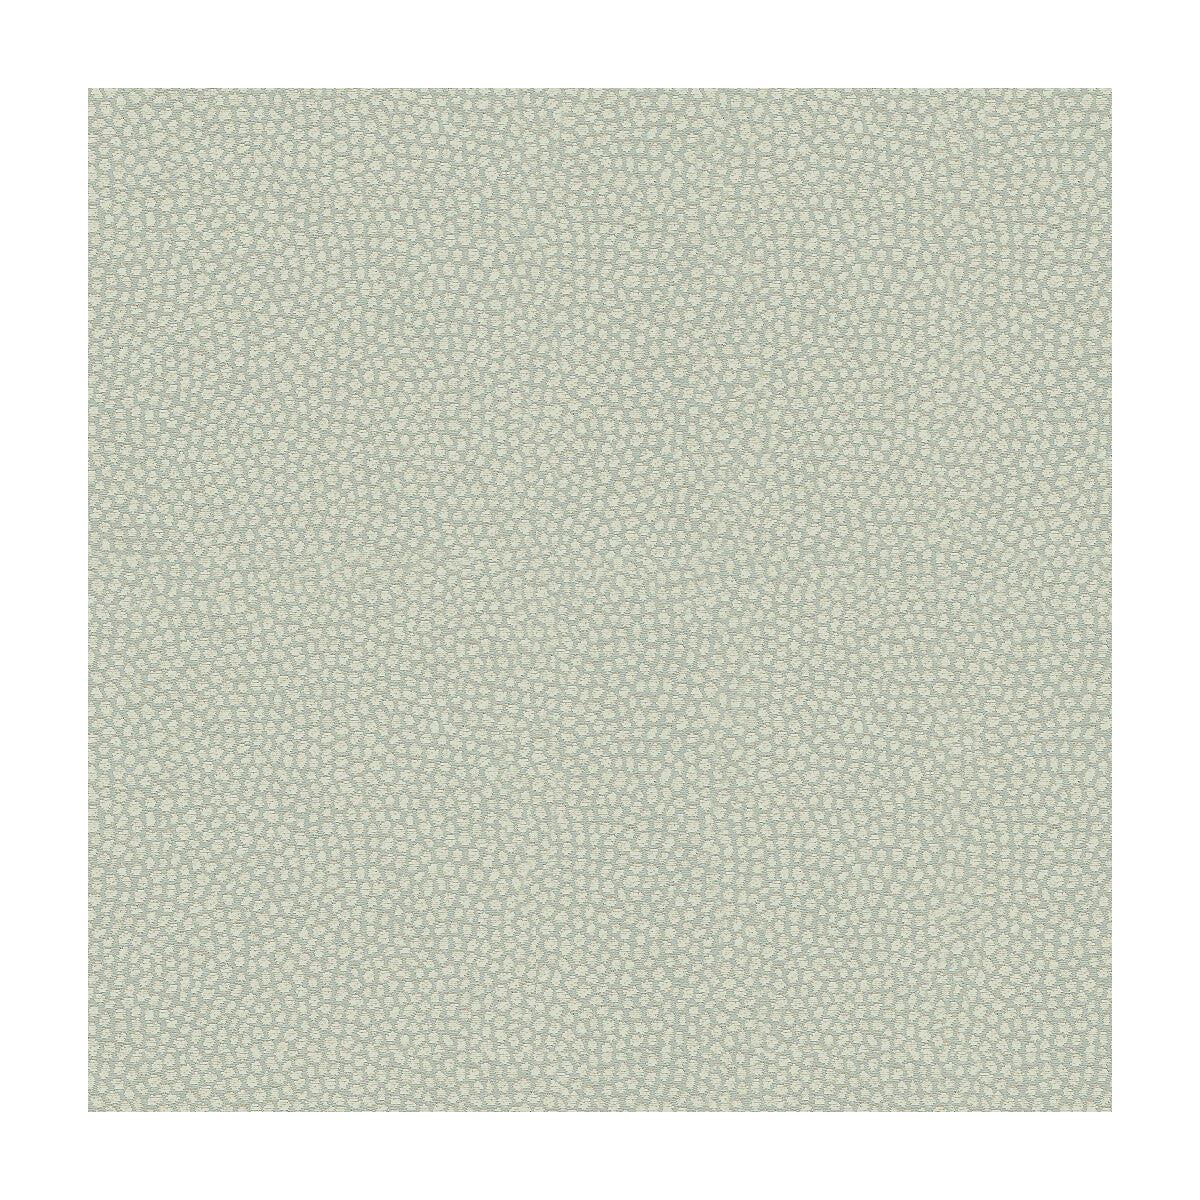 Brecken fabric in spa color - pattern 34126.15.0 - by Kravet Design in the Candice Olson collection